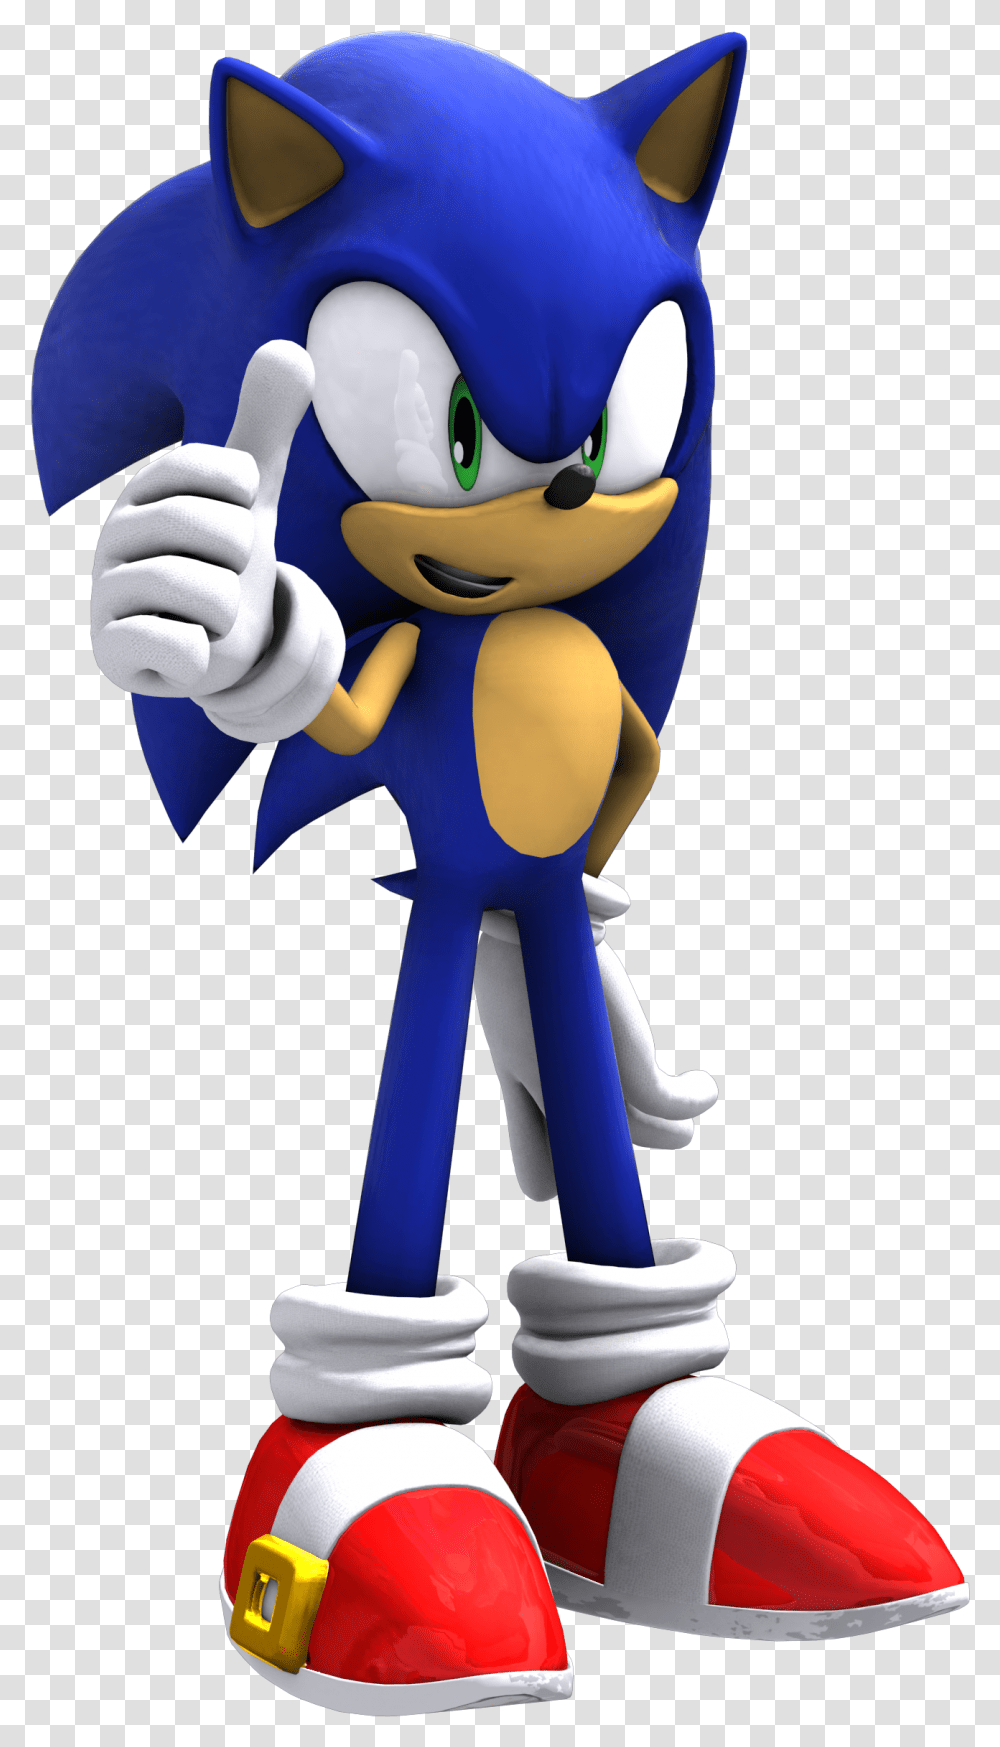 Download Sonic The Hedgehog Birthday Mania Sonic The Hedgehog, Toy, Hand, Figurine Transparent Png